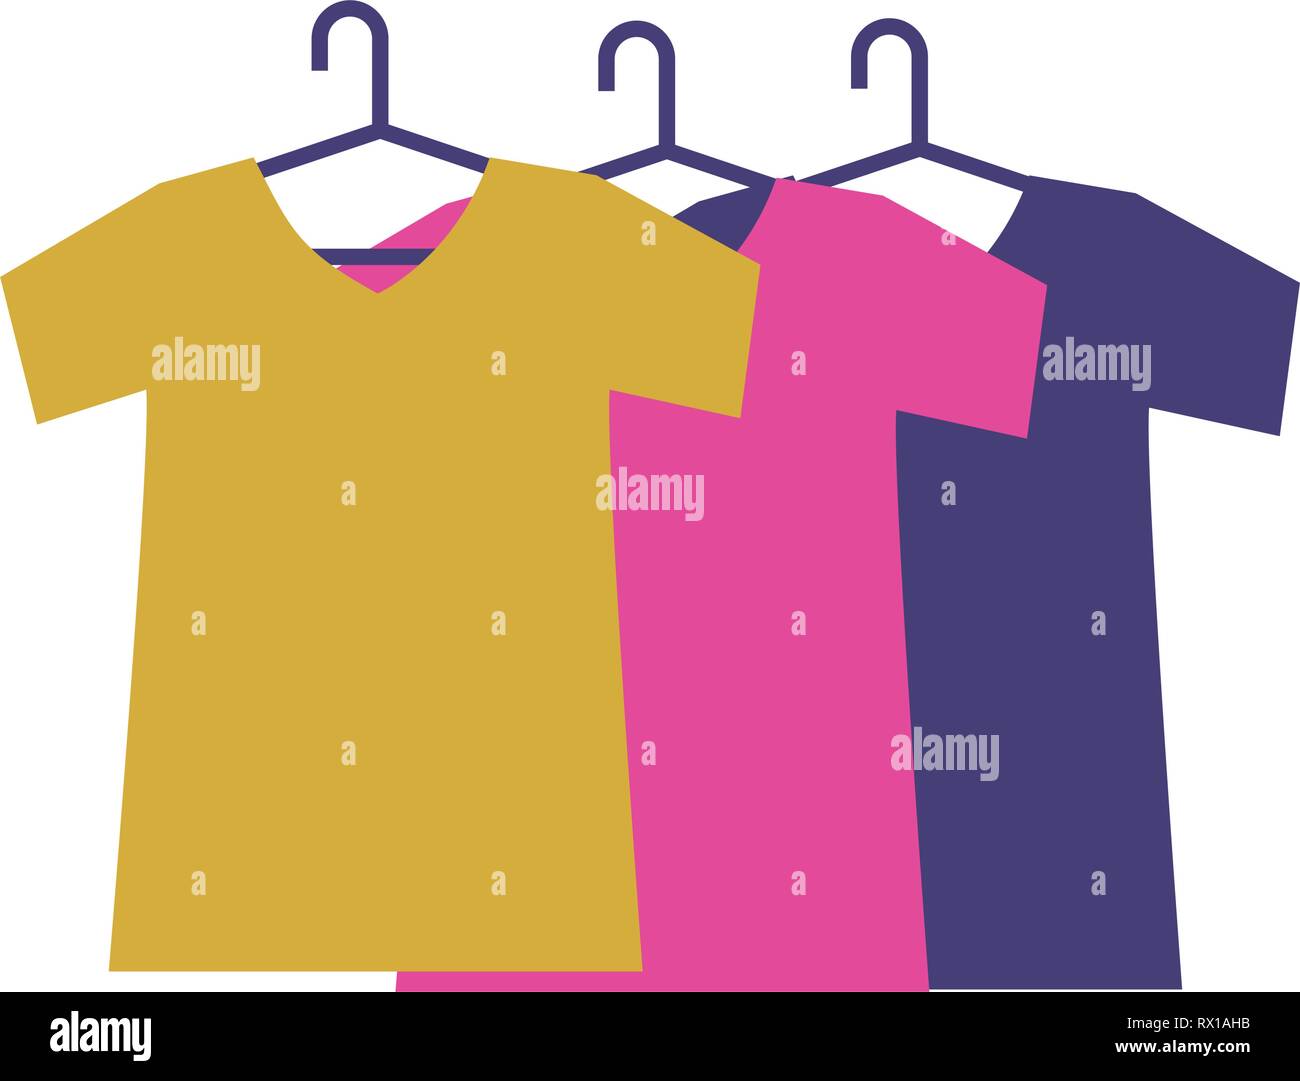 Download t shirts on hangers clothes cartoon Stock Vector Art ...